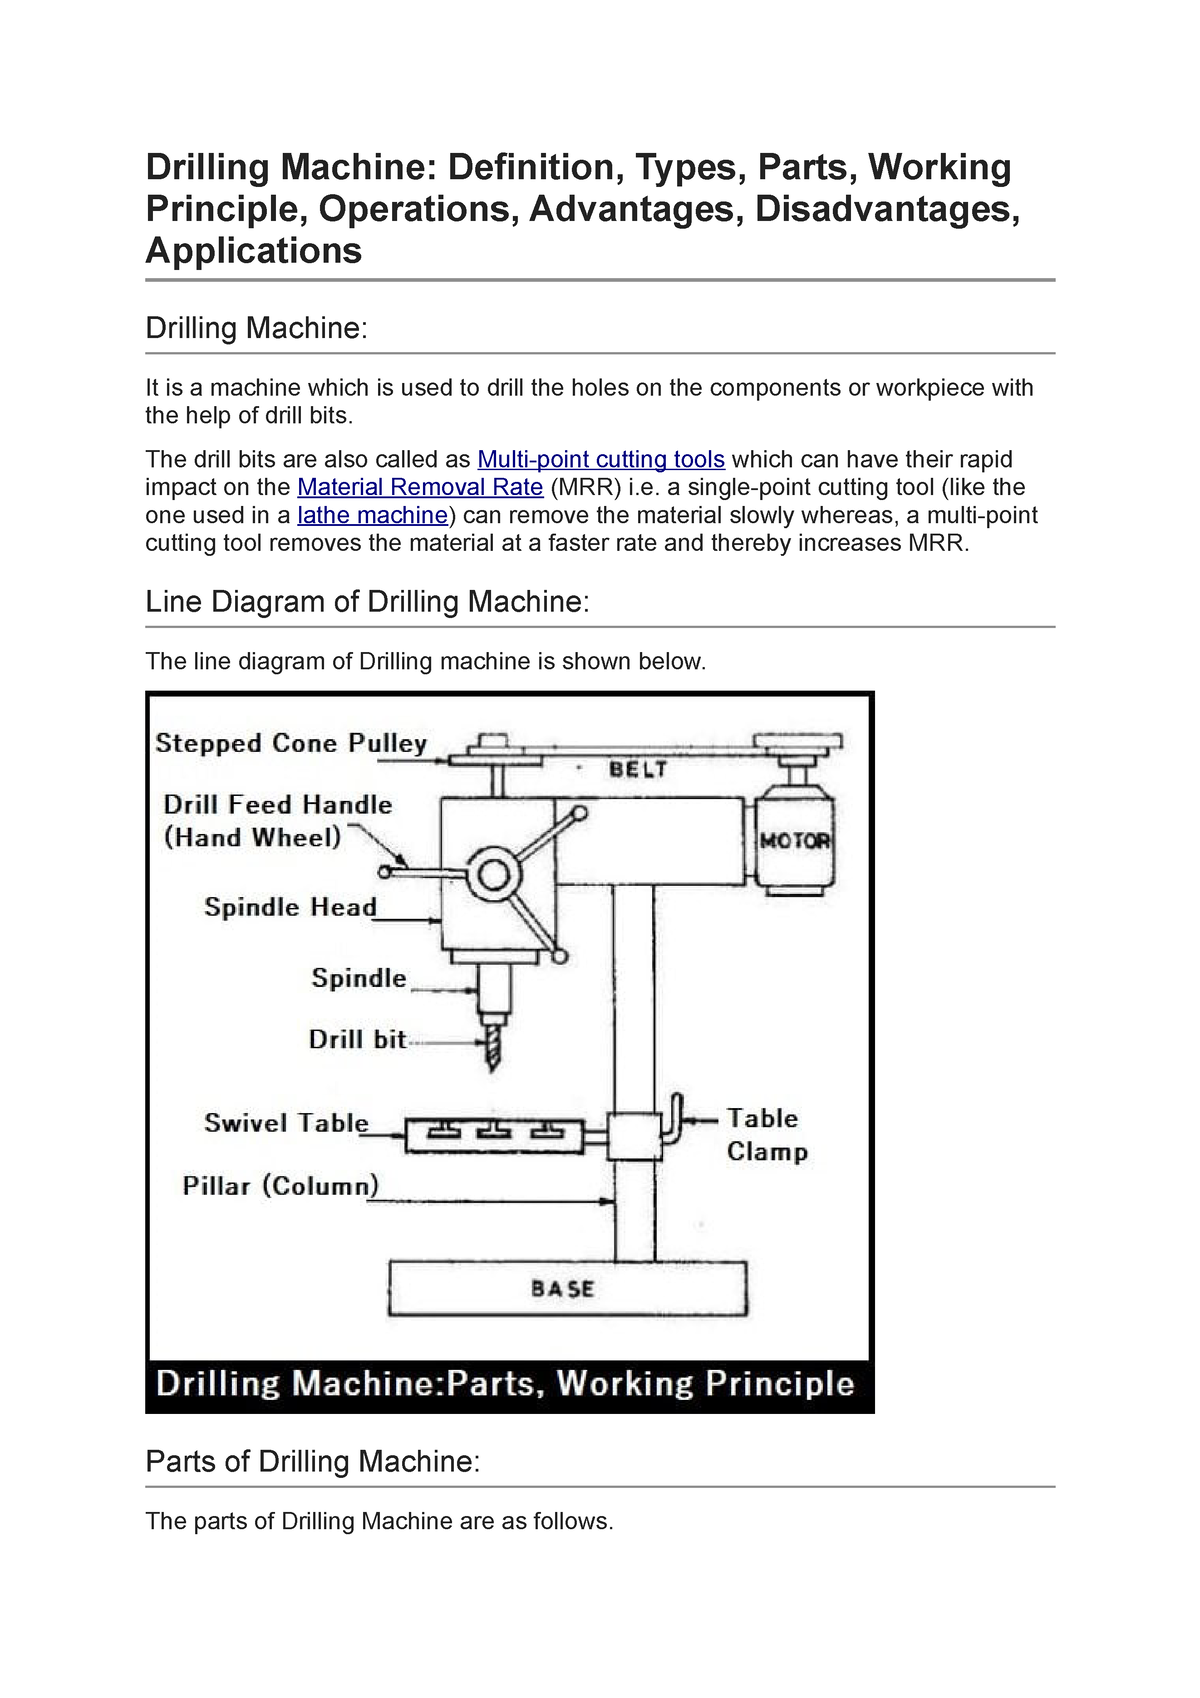 Sketch the block diagram of bench drilling machine showing its different  parts.